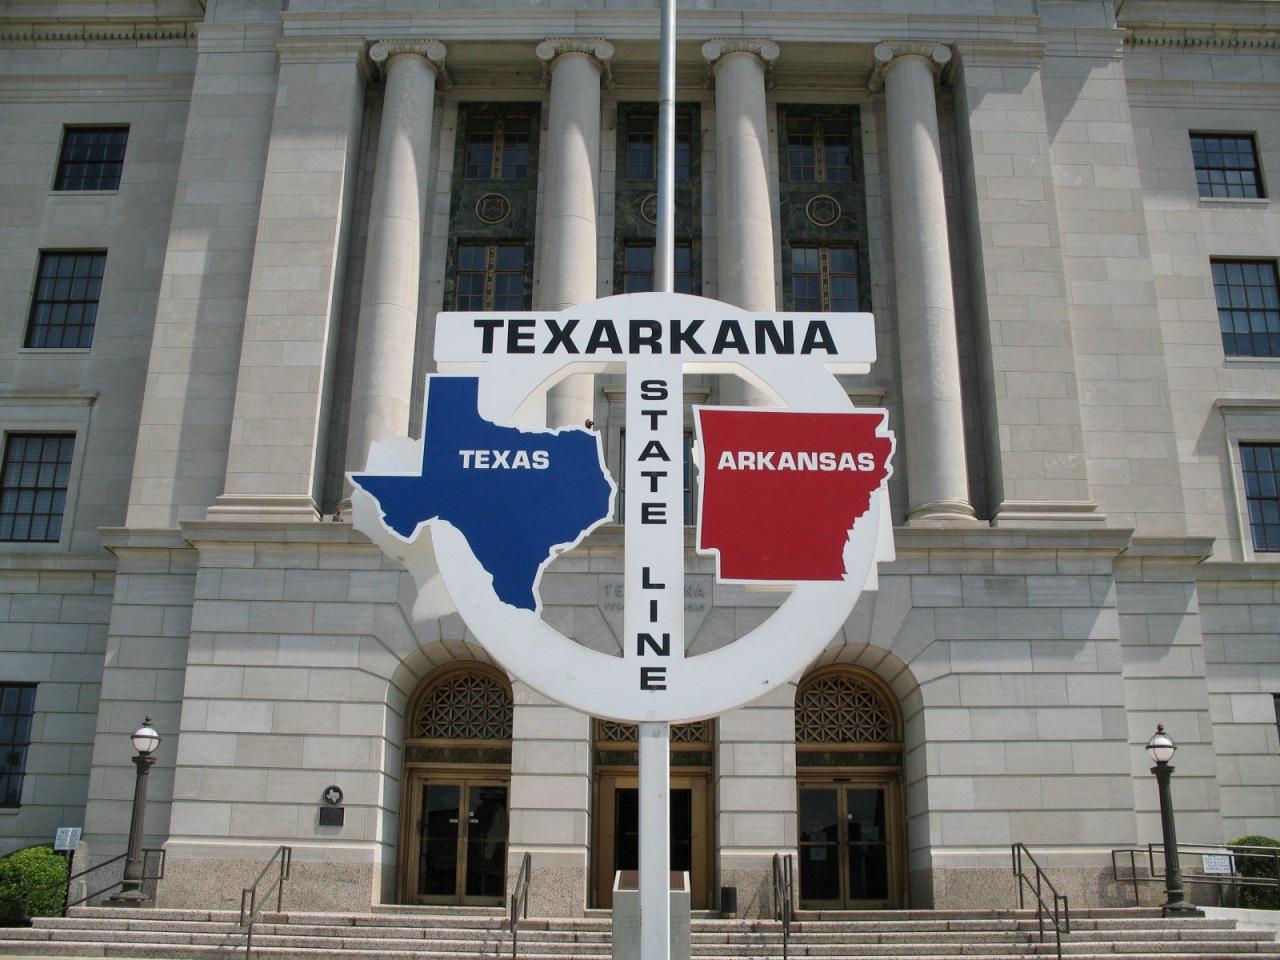 Texarkana US Post Office and Courthouse